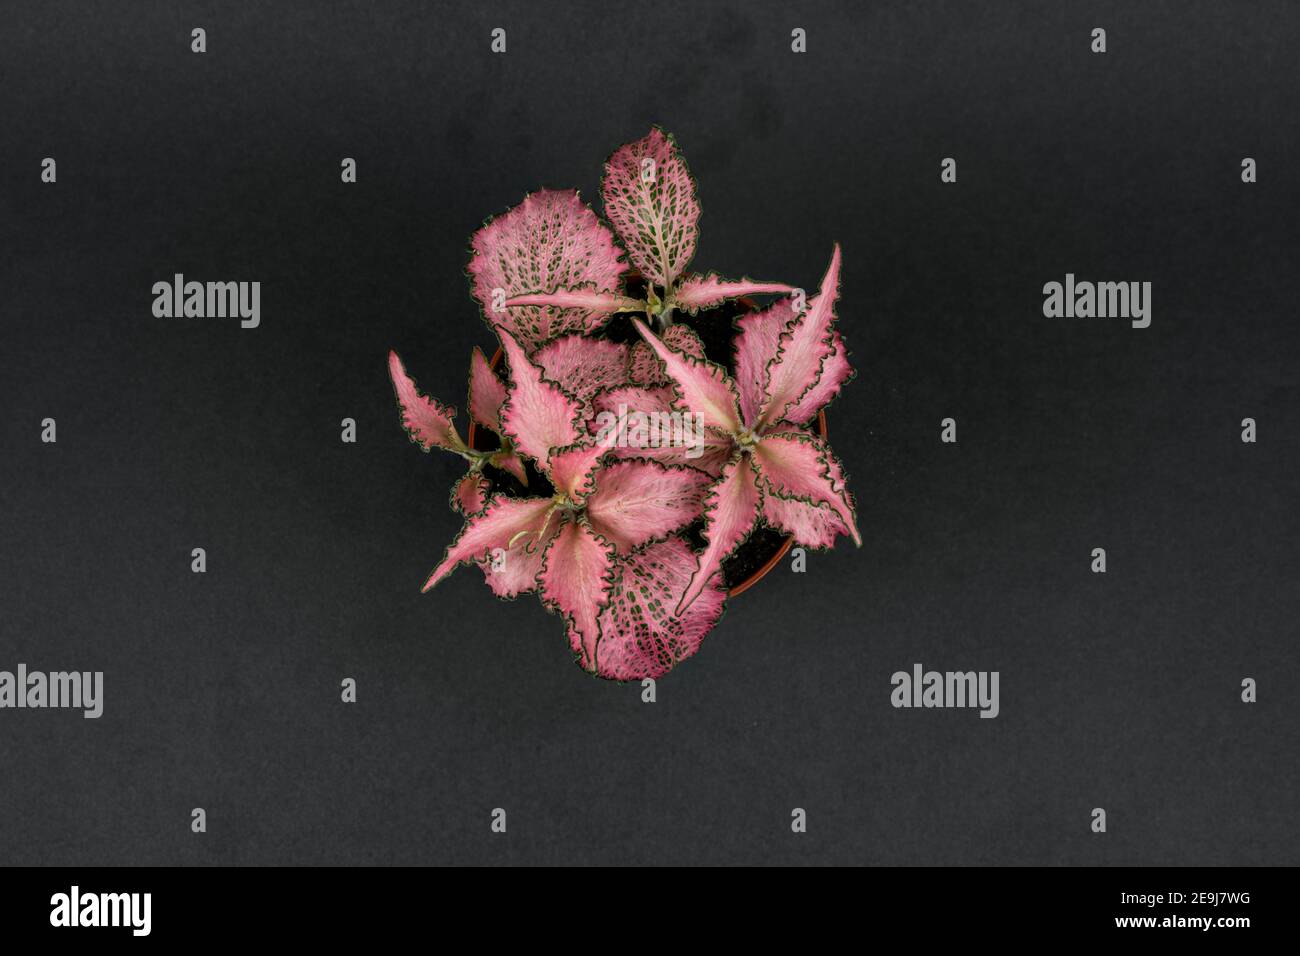 fittonia in flower pot on black background, overhead view Stock Photo